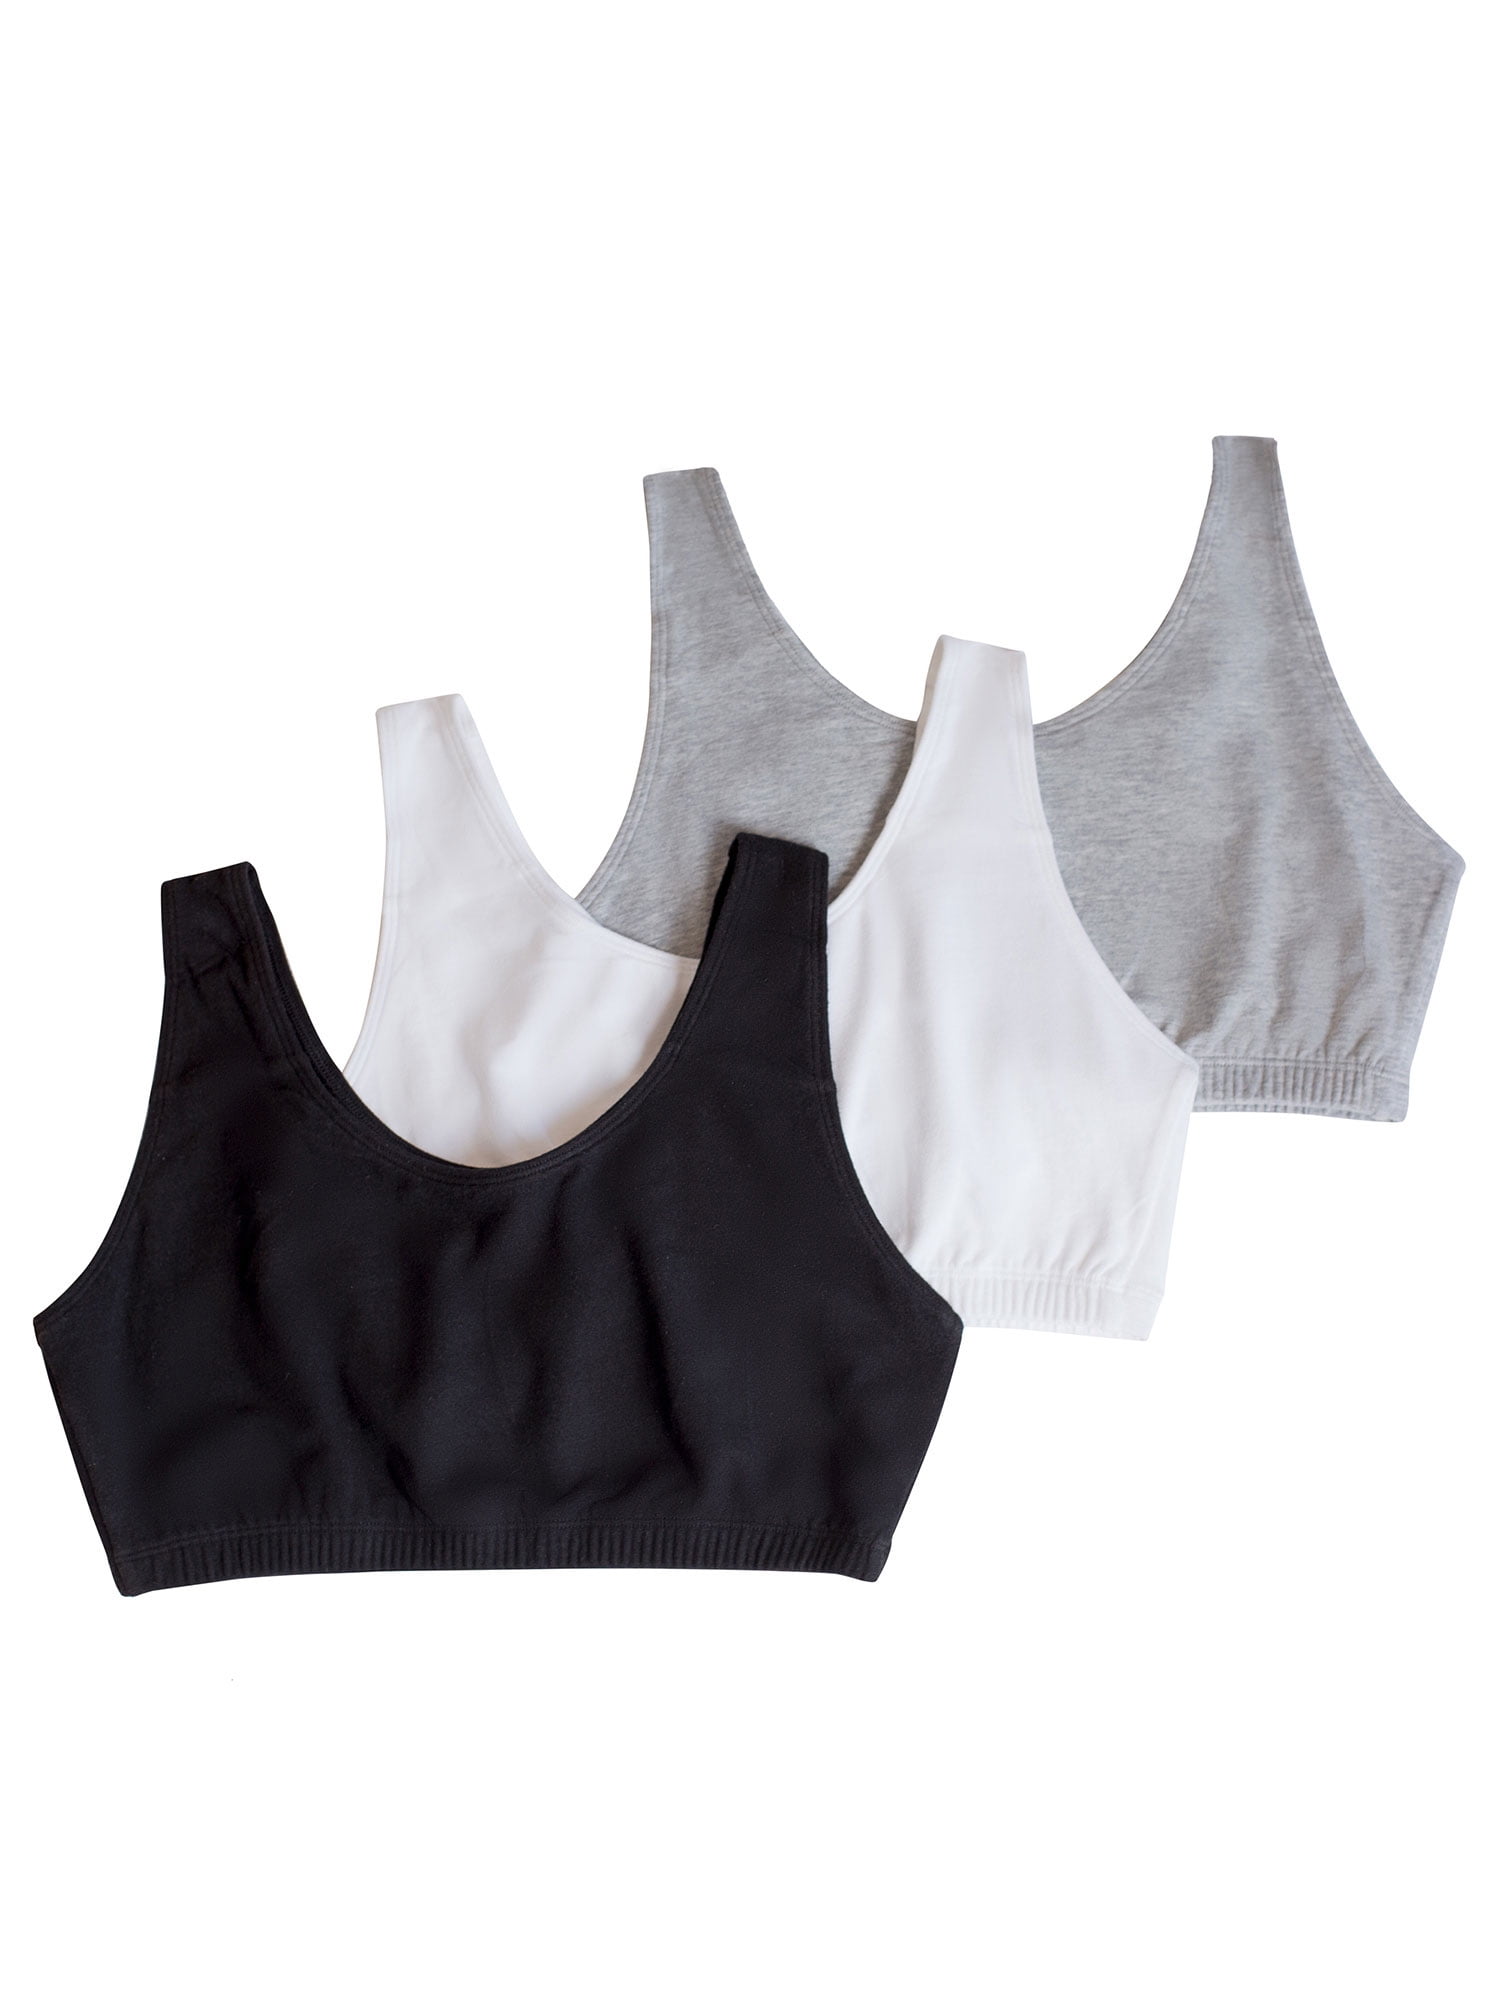 Pack of 3 Fruit of the Loom Womens Built-Up Sports Bra, 